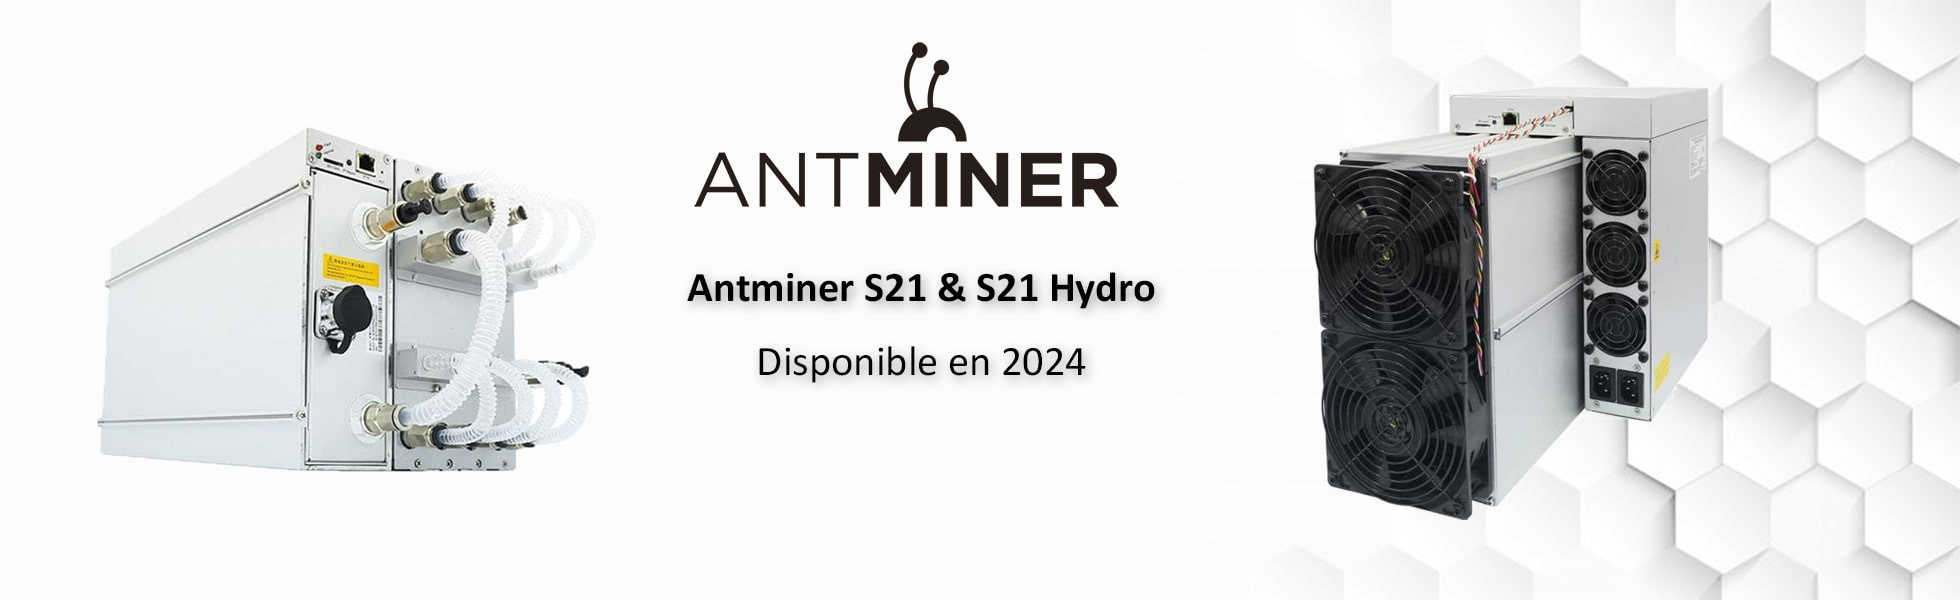 Les l'asic bitcoin Antminer S21 & S21 Hydro